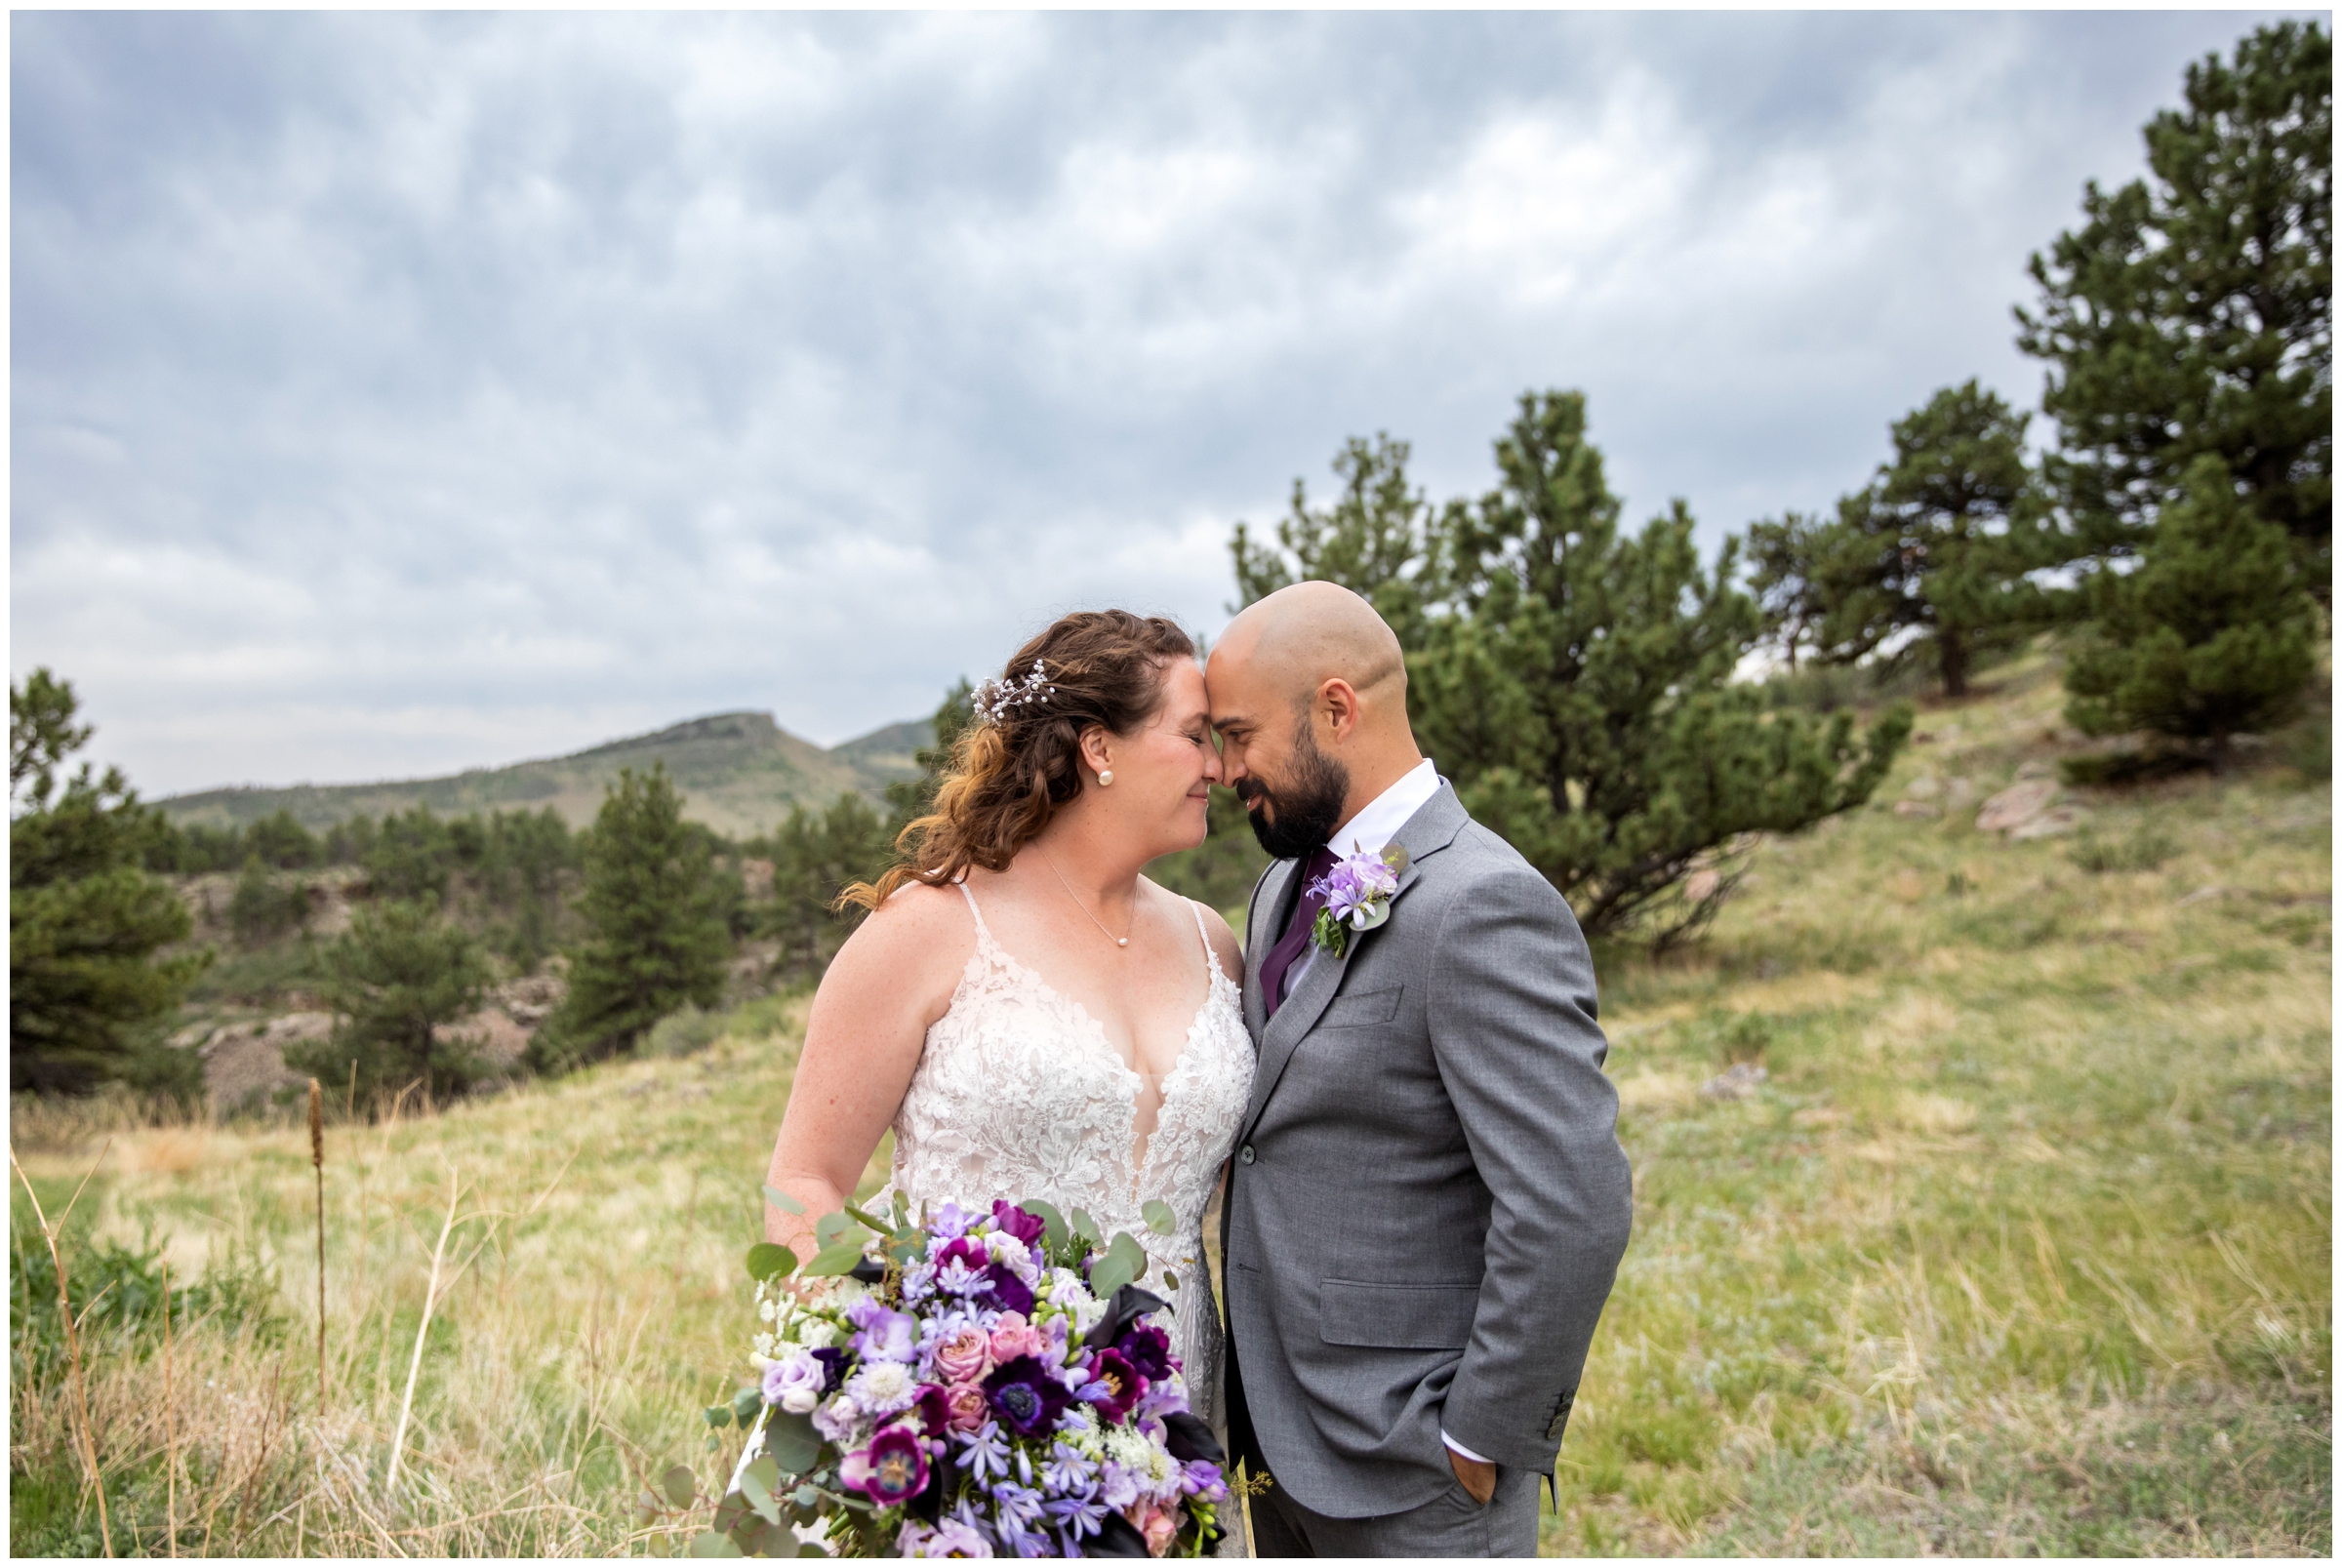 Colorado mountain wedding portraits at Lionscrest Manor by Plum Pretty Photography 